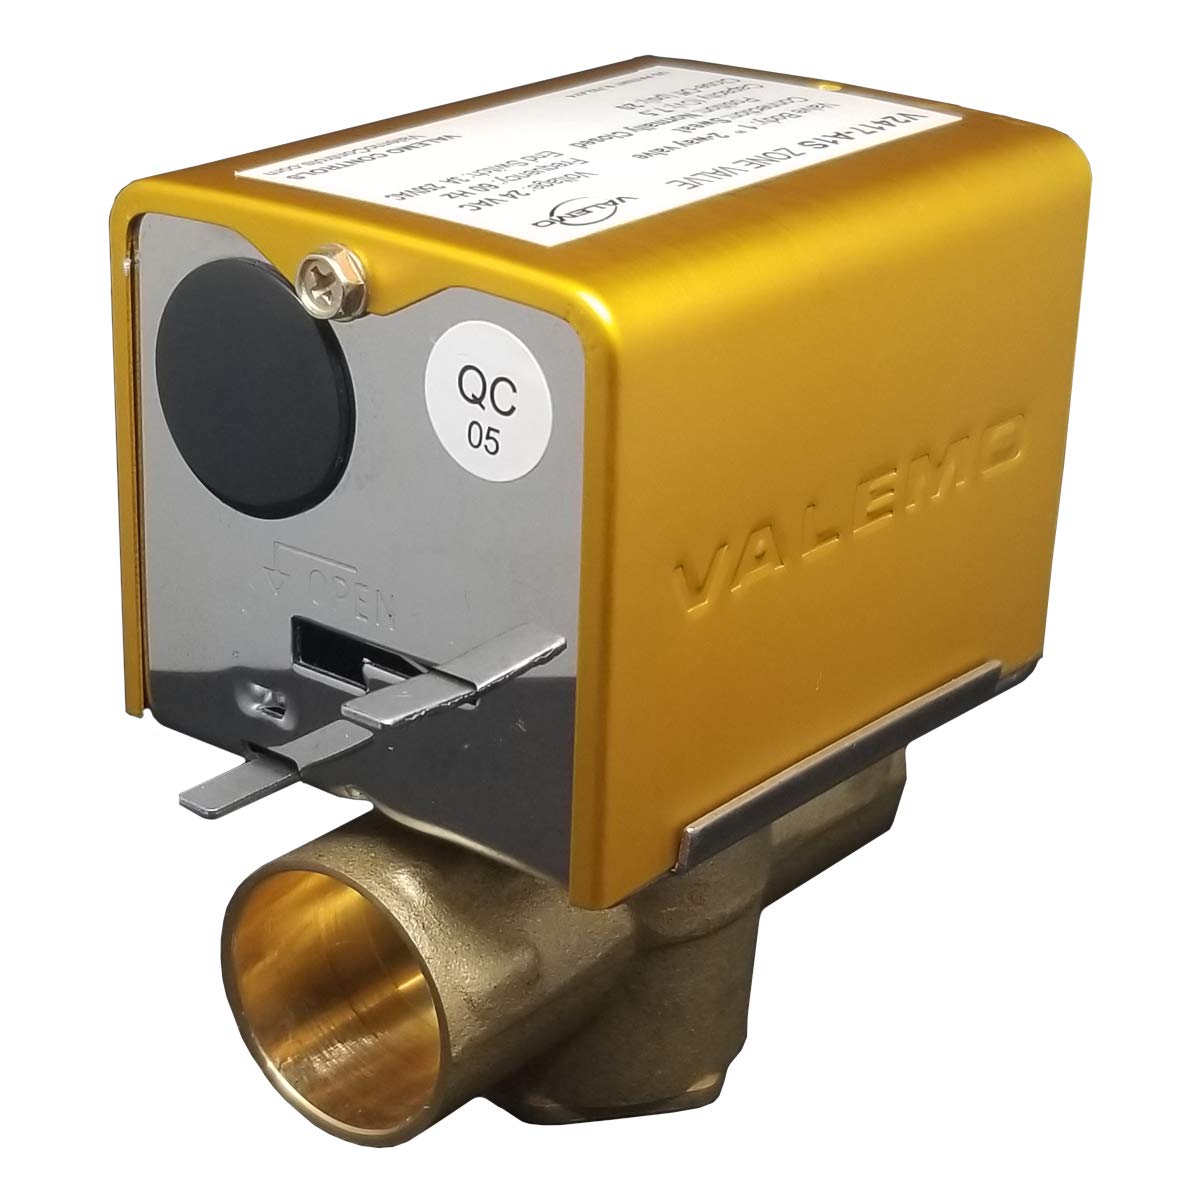 Valemo V2417-A1S Motorized Zone Valve, 2-way, 1" Sweat, Normally Closed, 24 VAC, with End Switch